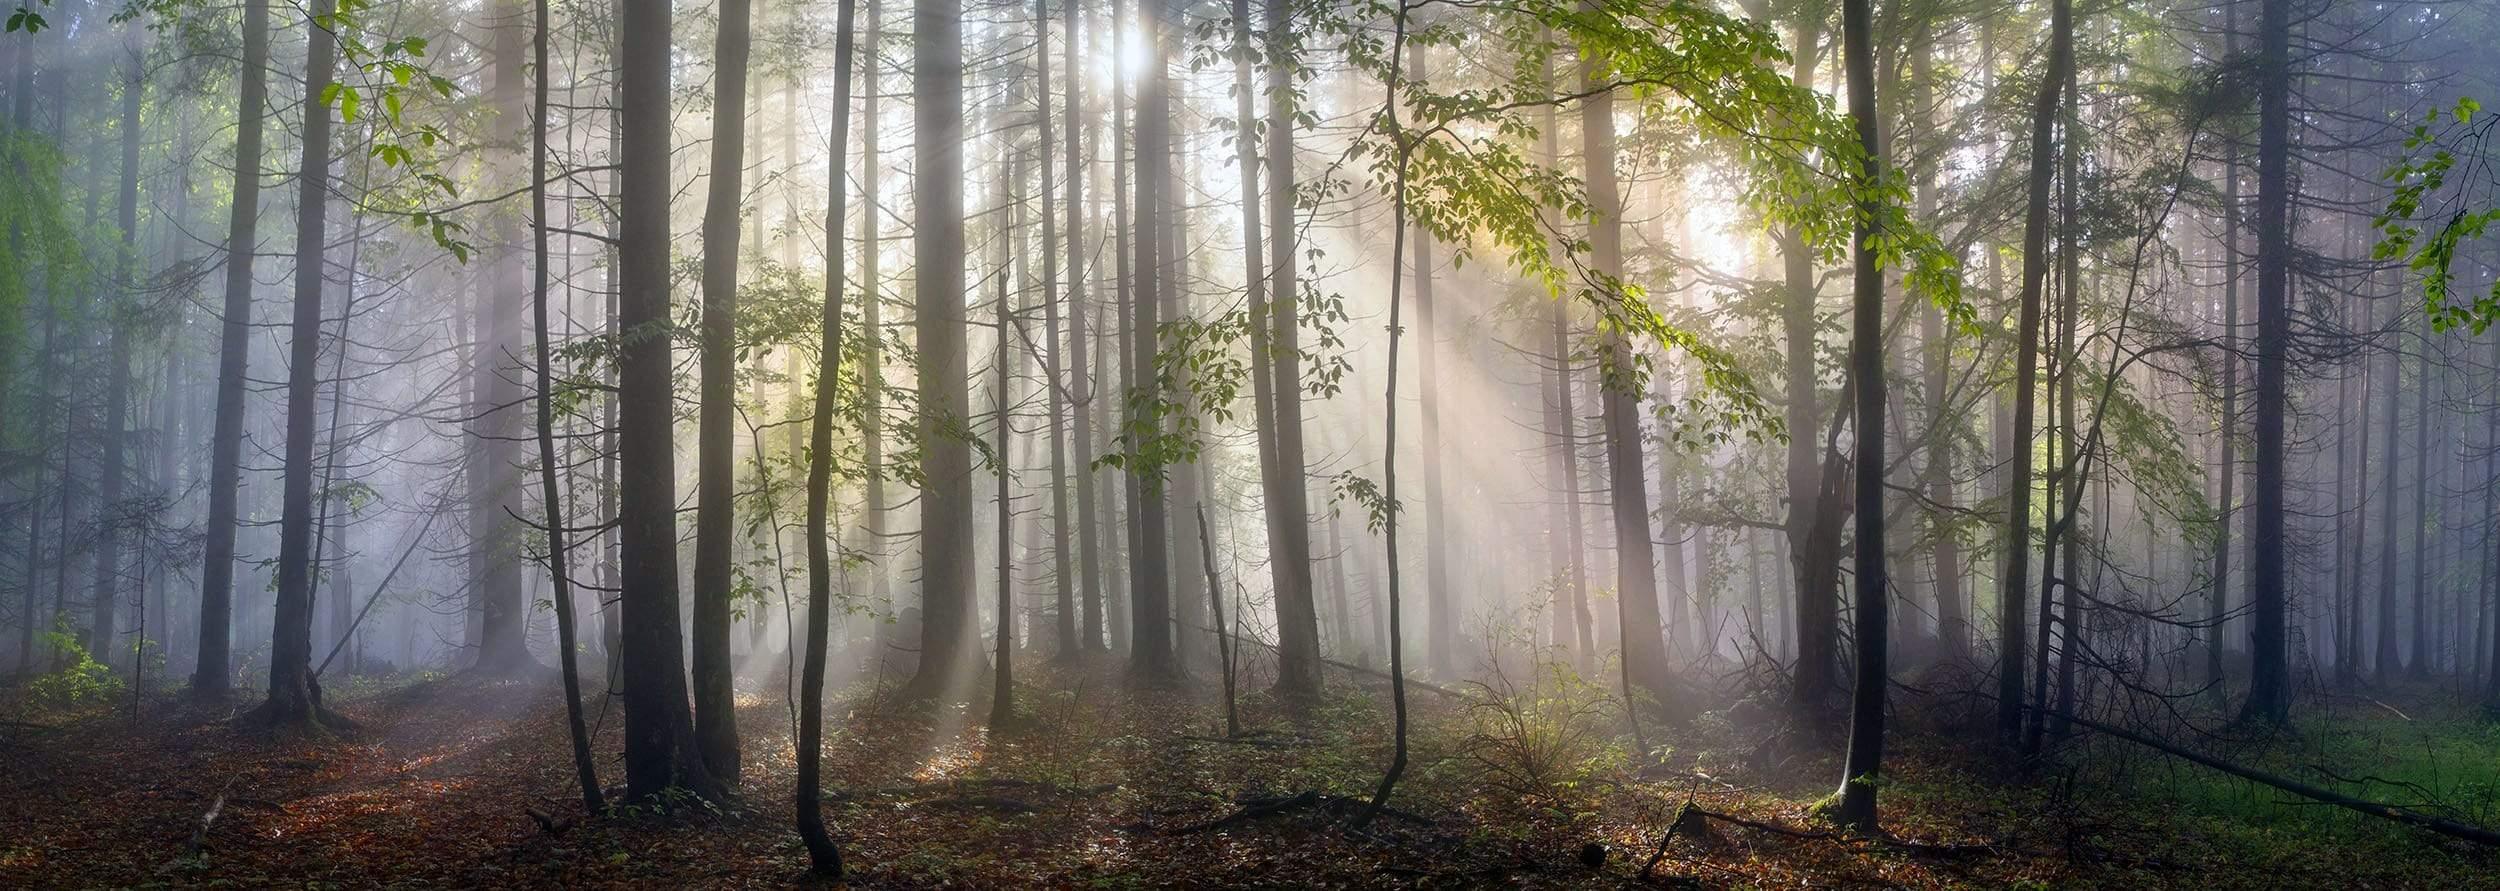 Fog in forest with sun beams